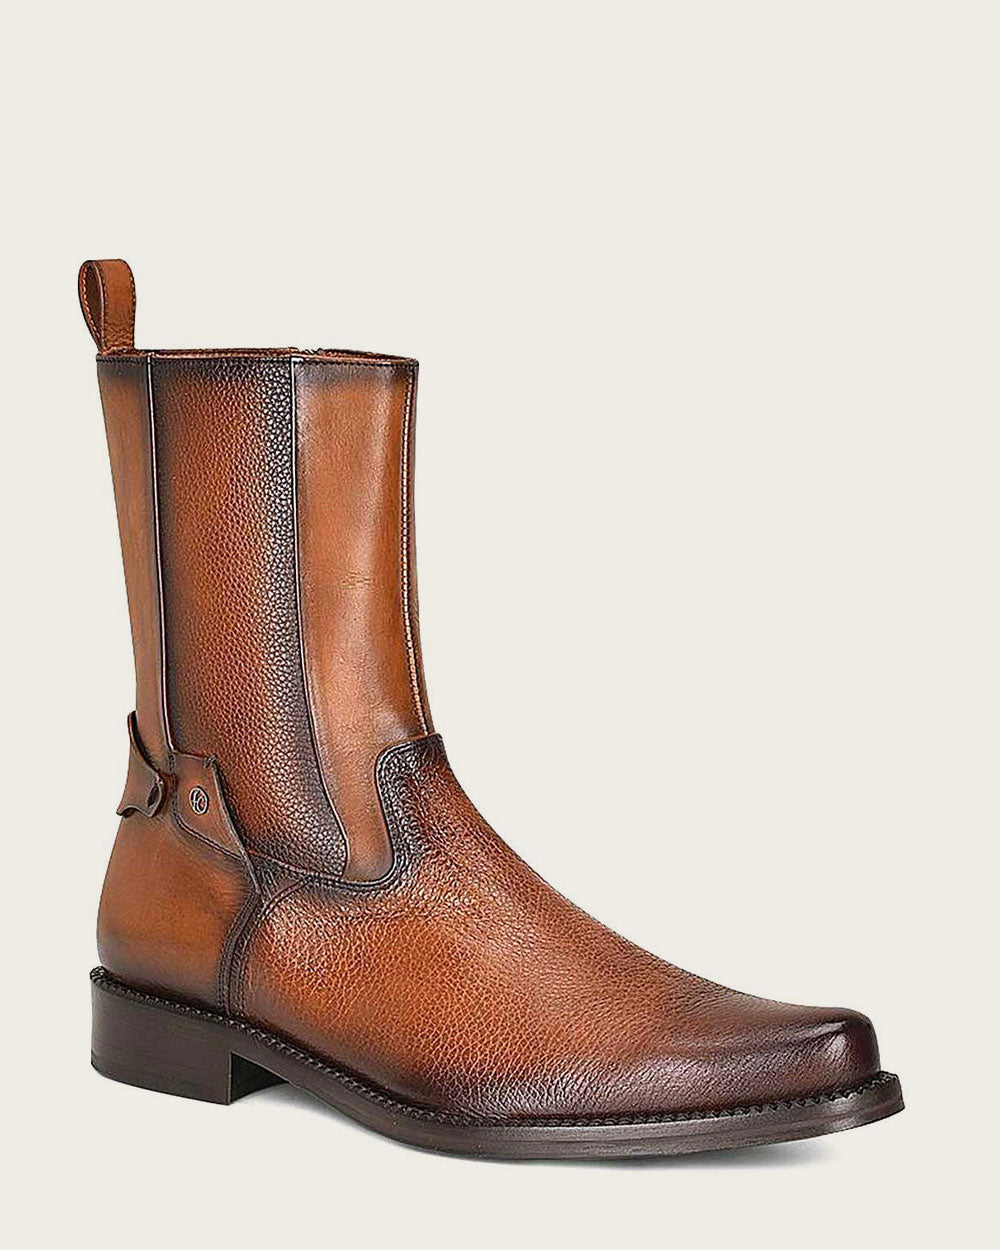 Honey Deer Leather Boots: Cuadra elevates your formal wear with elegance. 